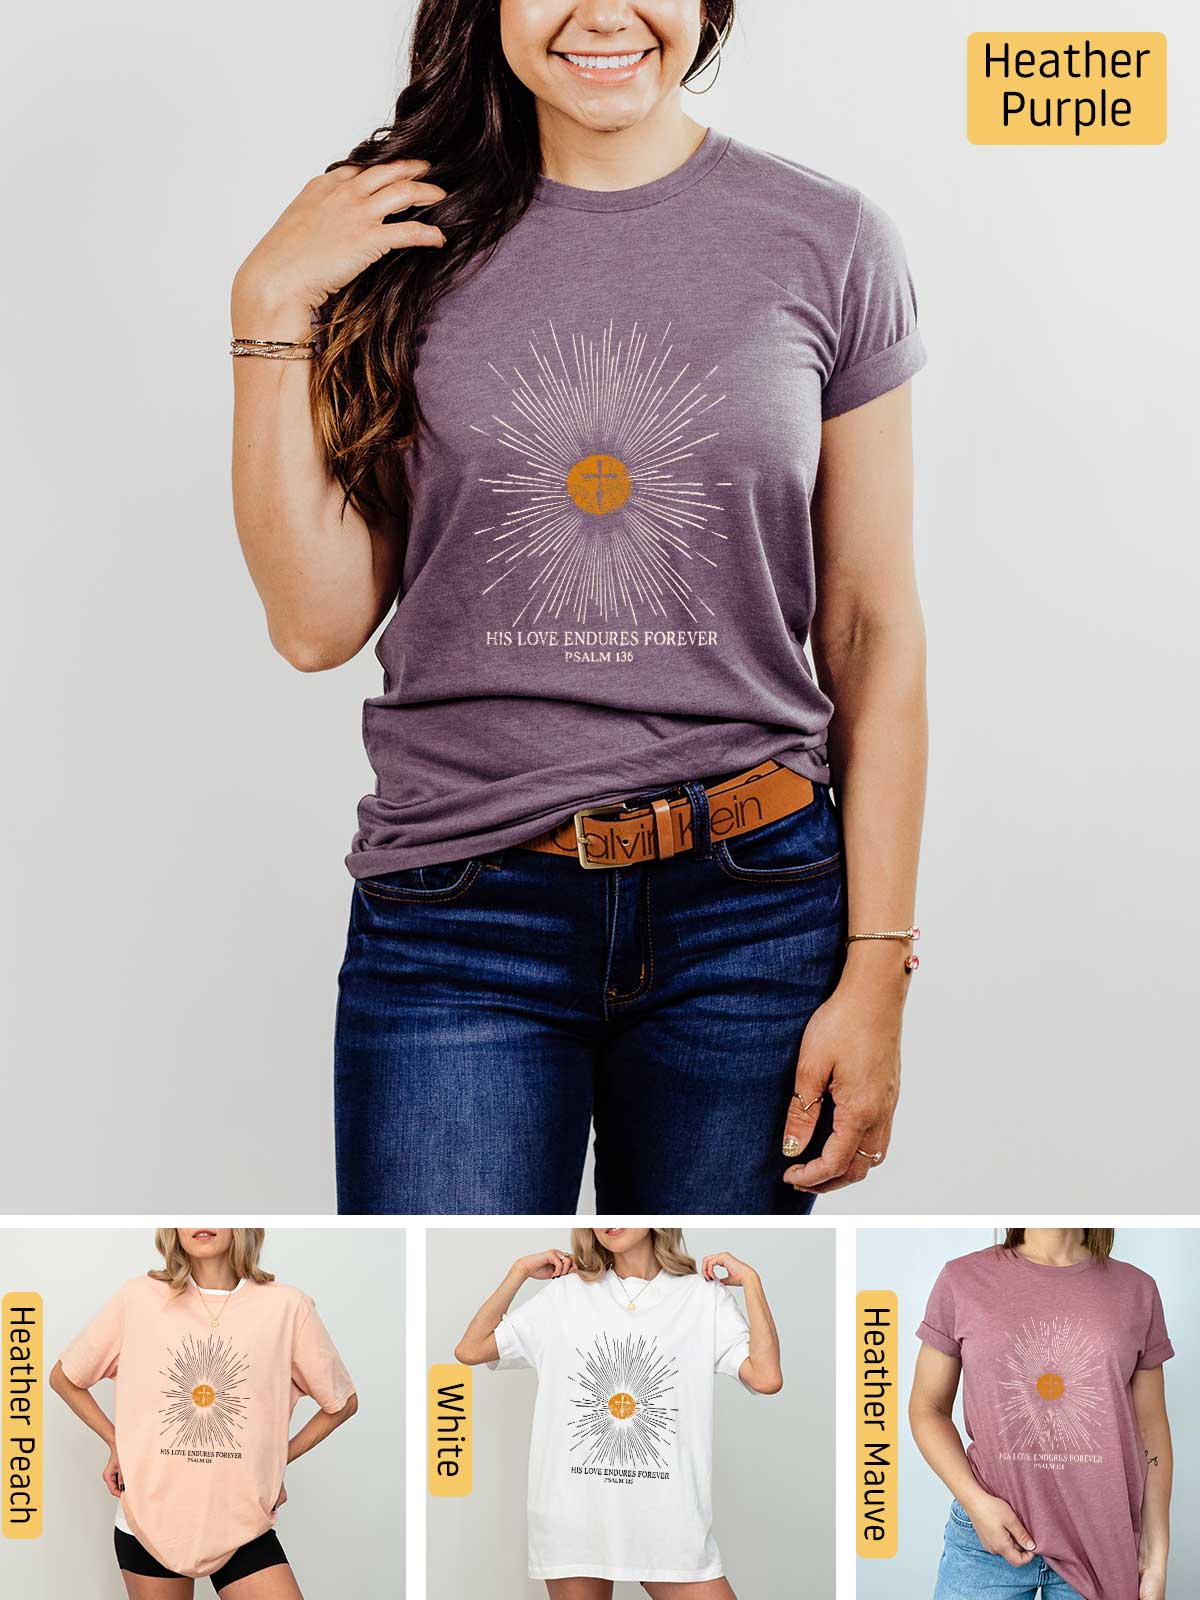 a woman wearing a t - shirt with a sunflower on it